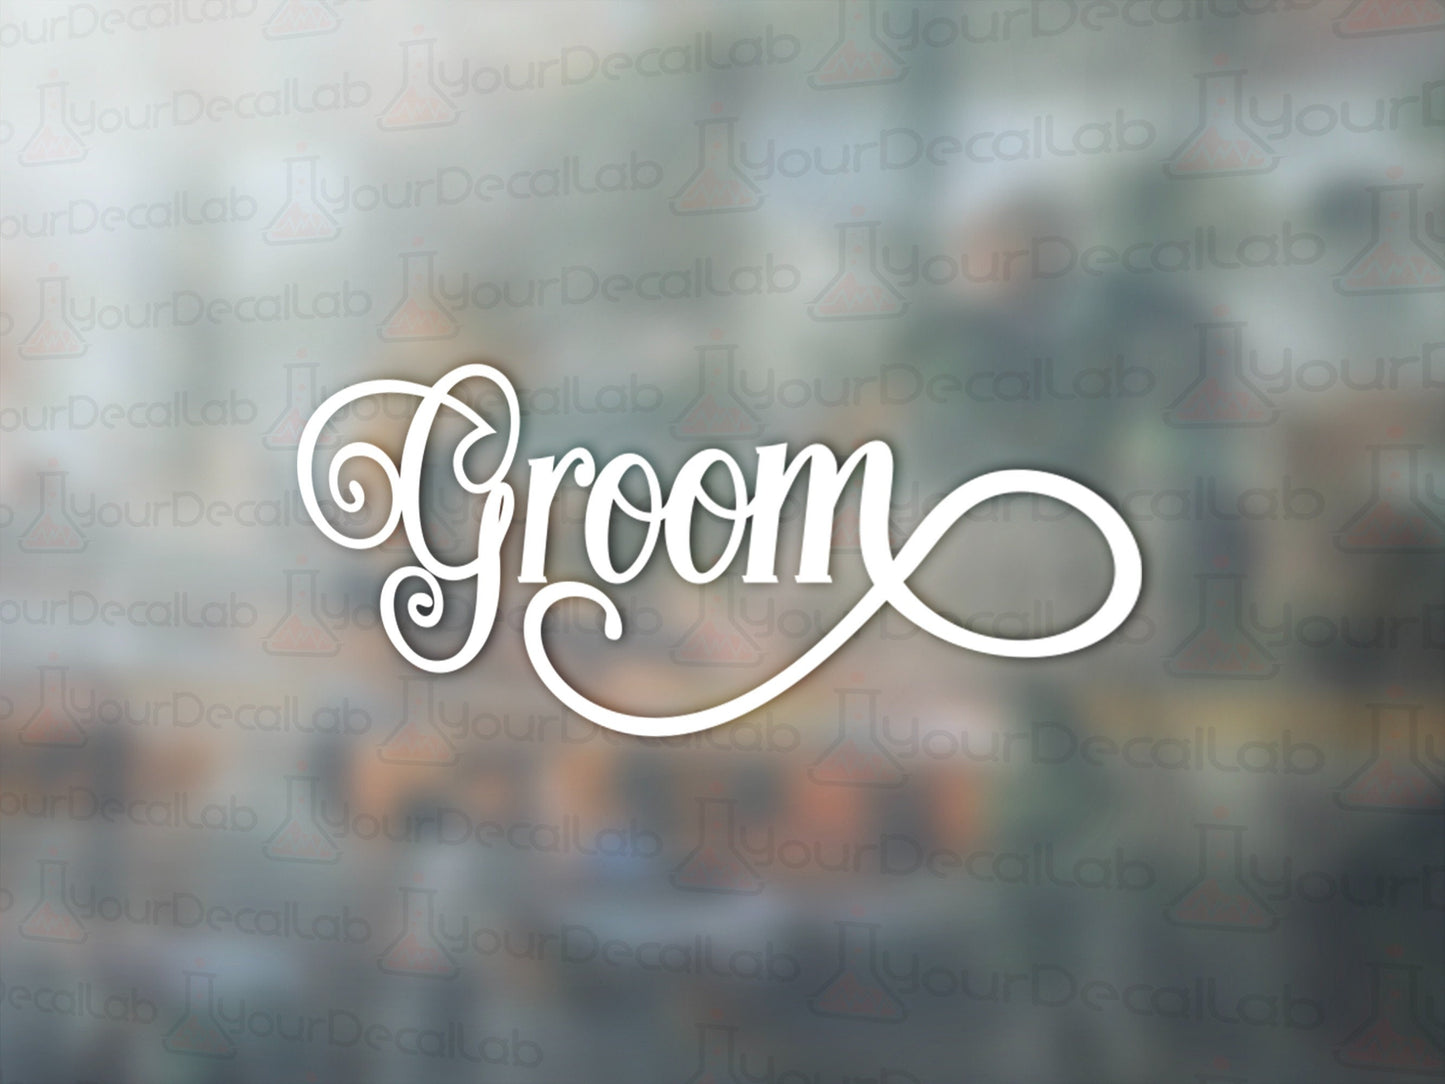 Groom Wedding Decal - Many Colors & Sizes